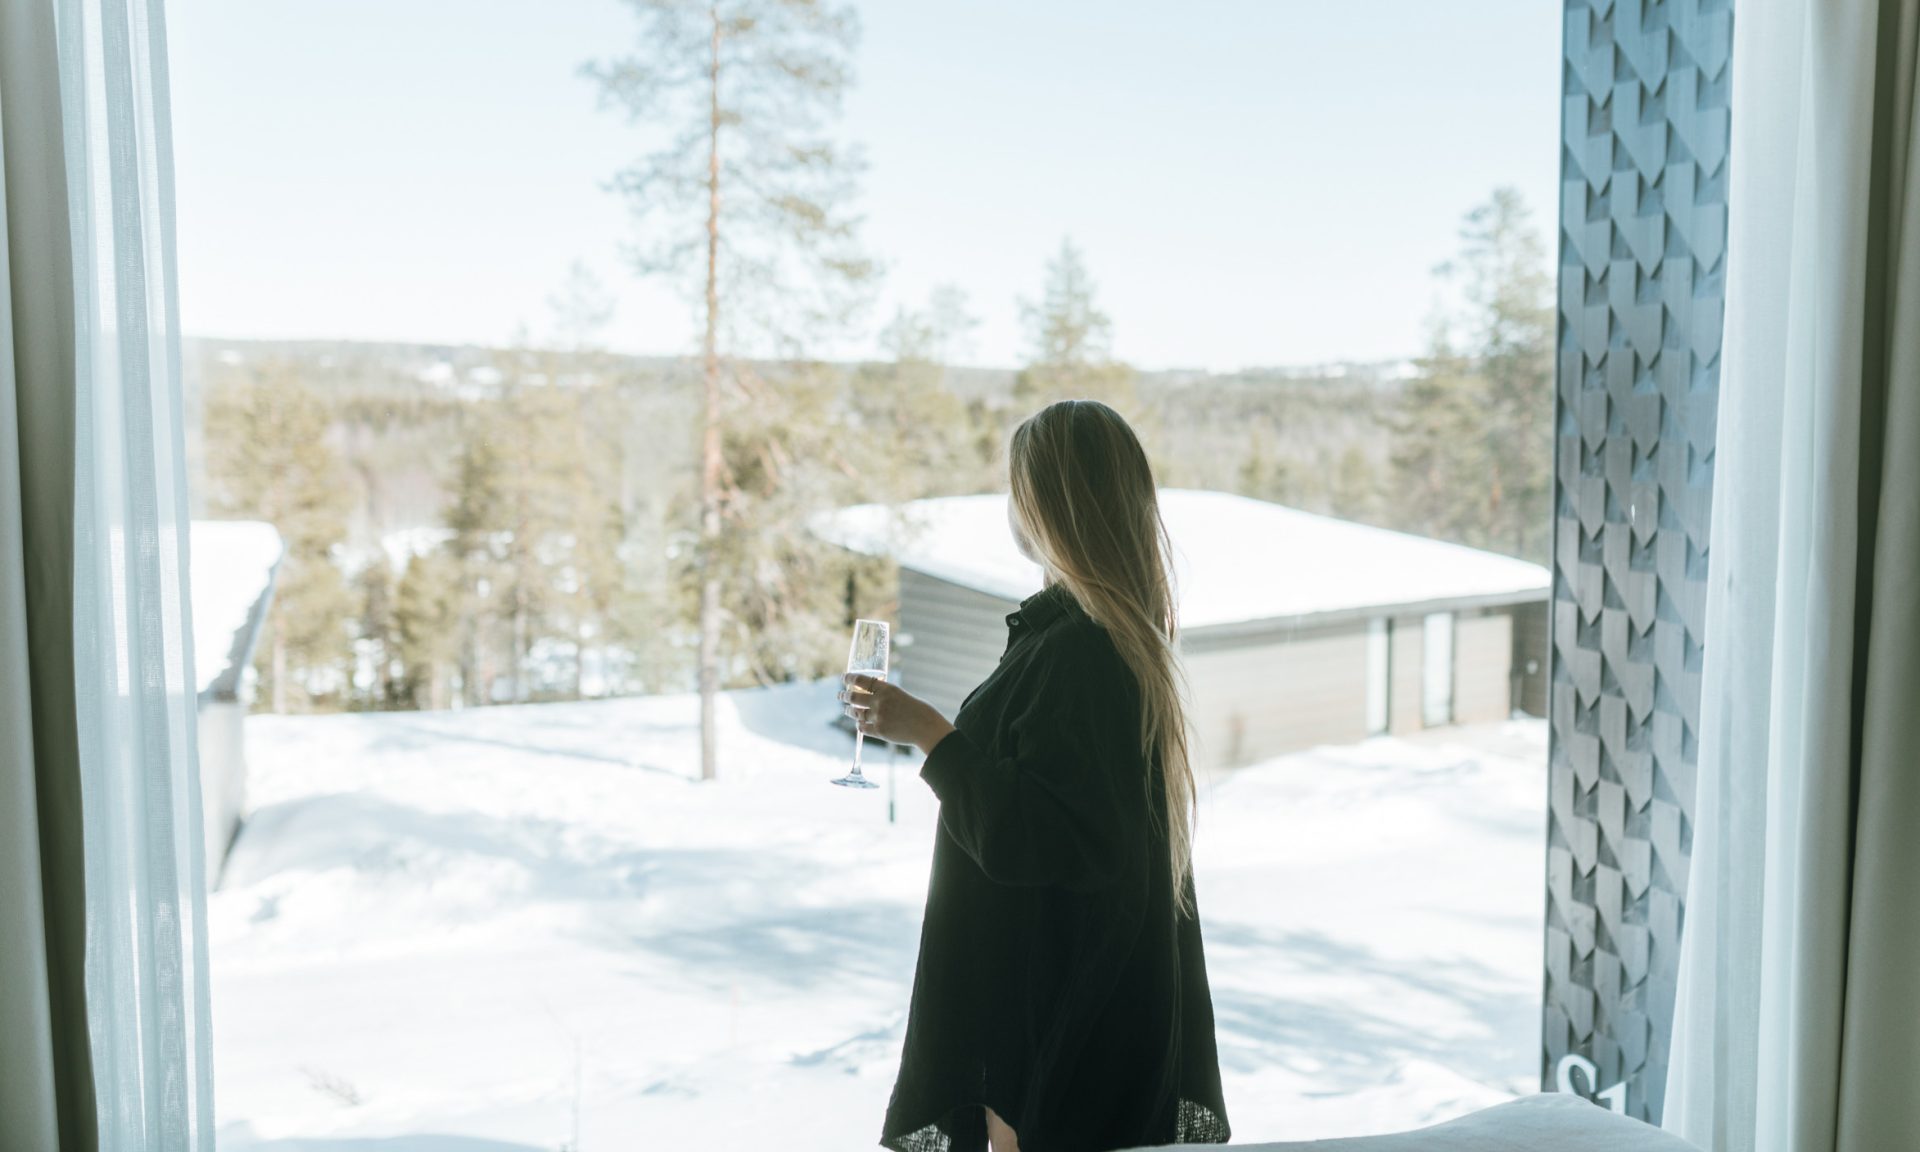 A woman enjoying a sunny spring time in Lapland, Arctic TreeHouse Hotel suite.